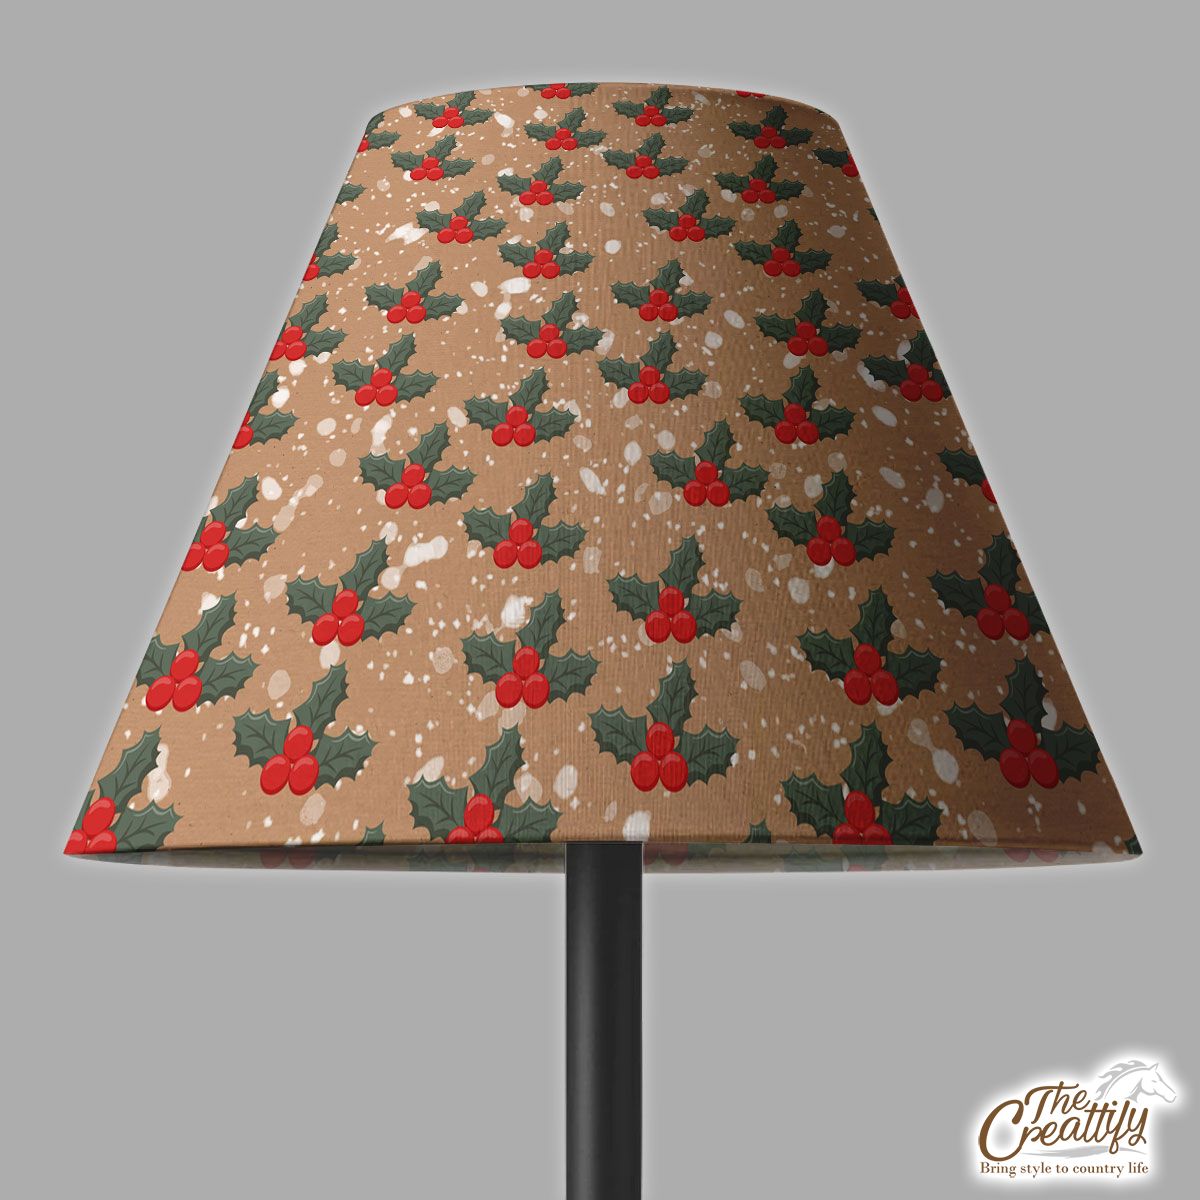 Holly Leaf On Snowflake Background Lamp Cover